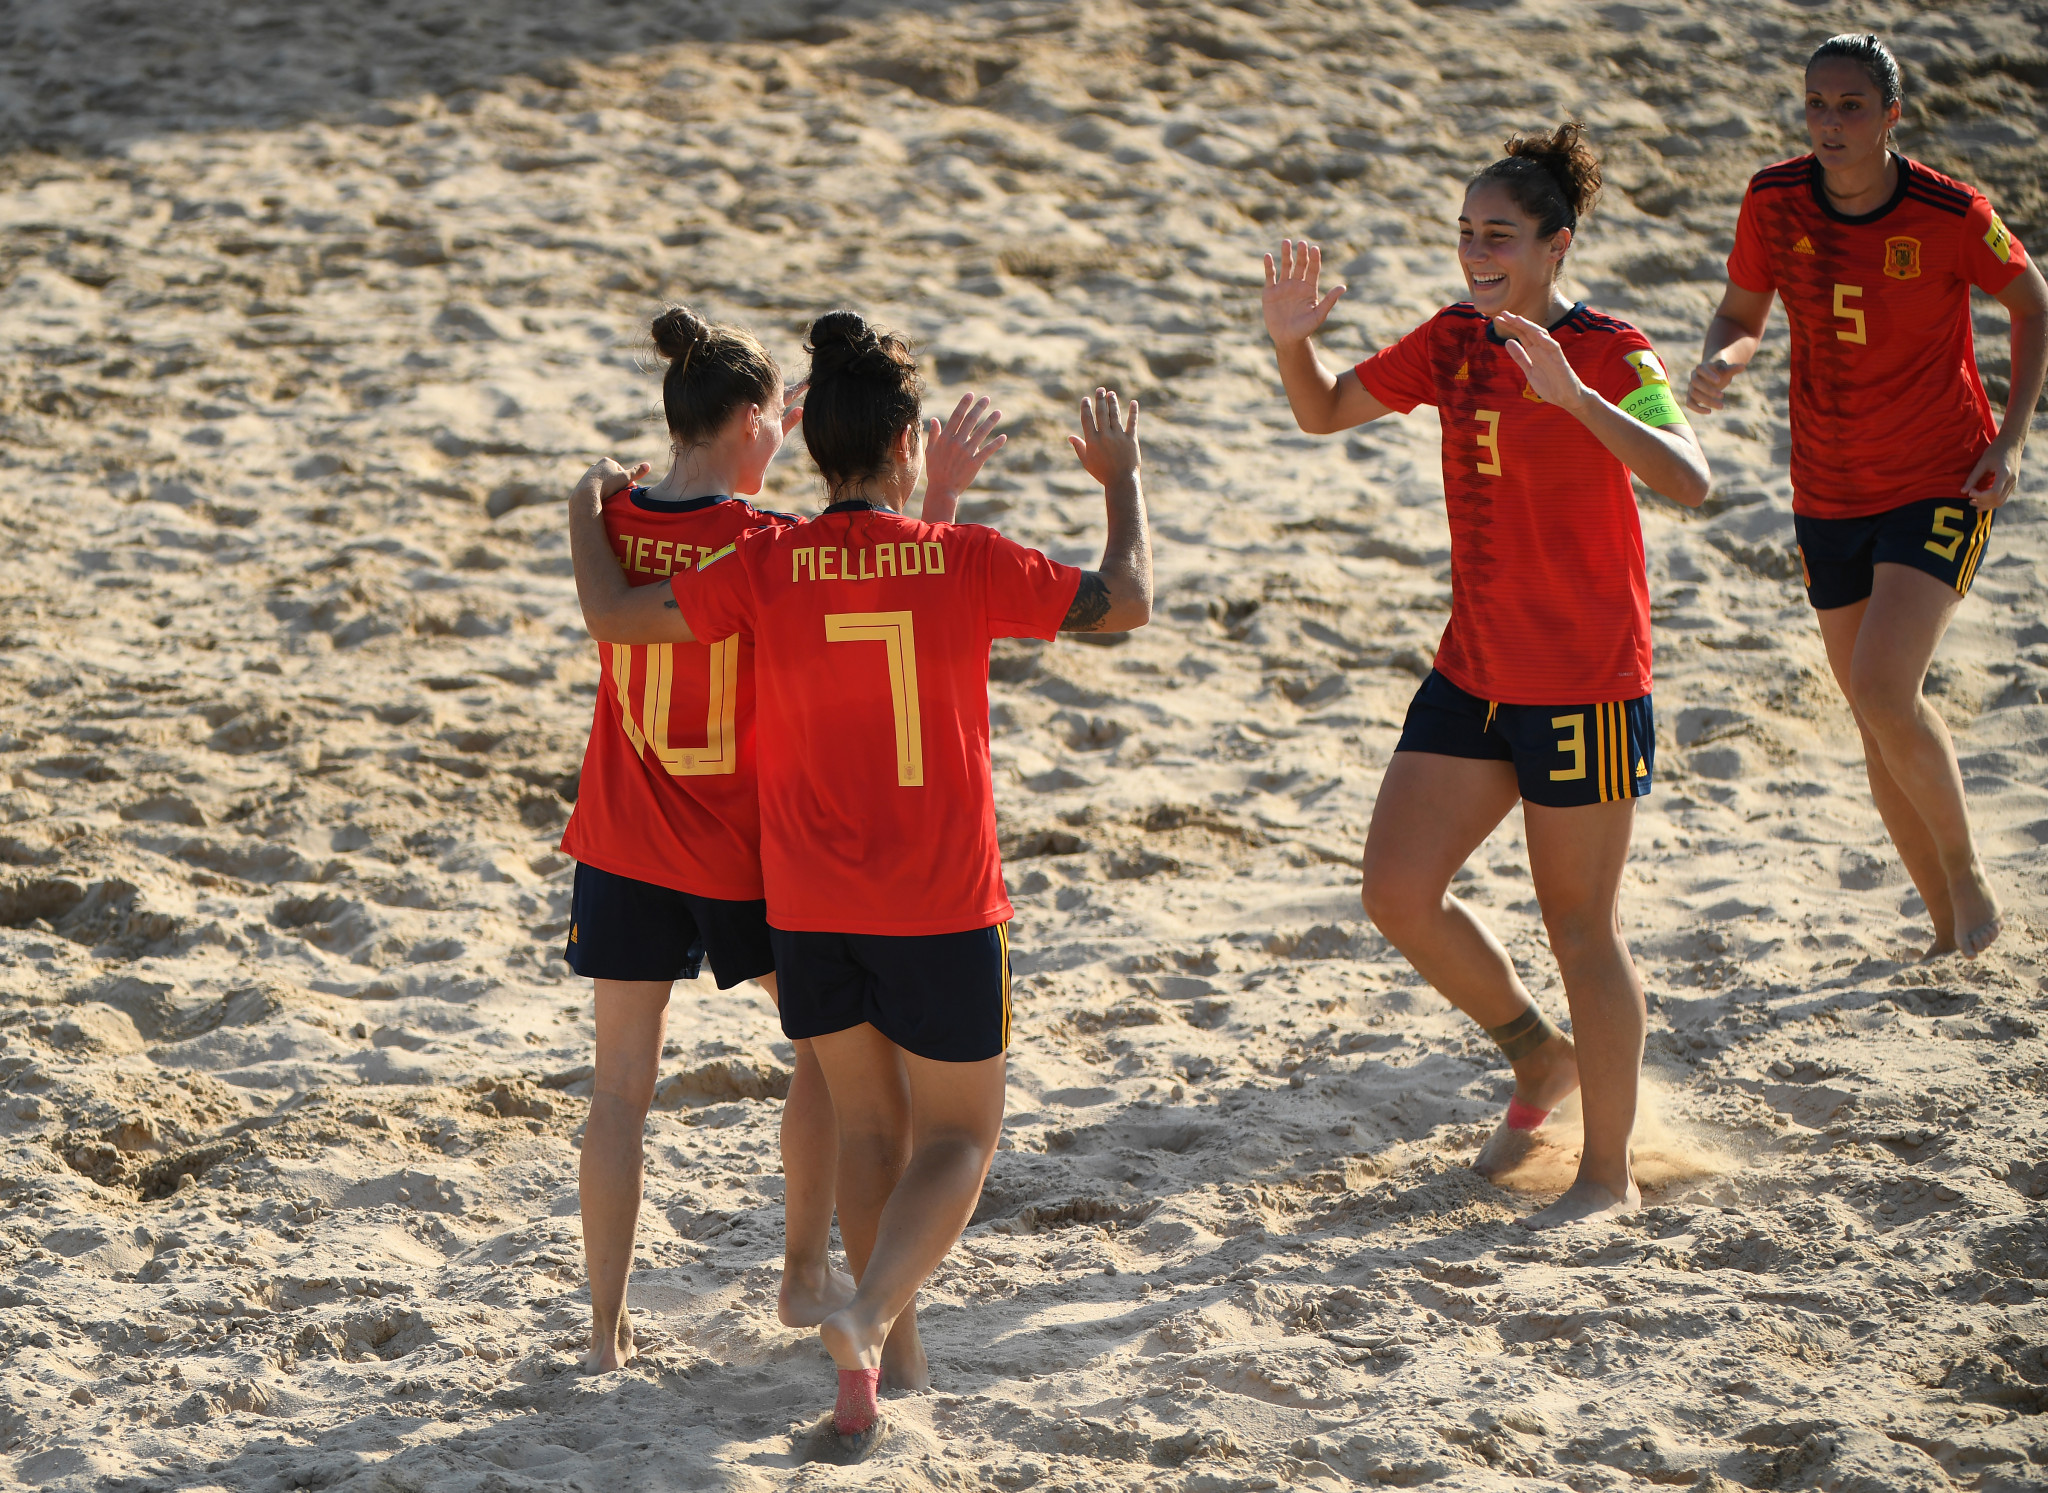 Spain topped the medal standings at the 2019 ANOC World Beach Games ©Getty Images